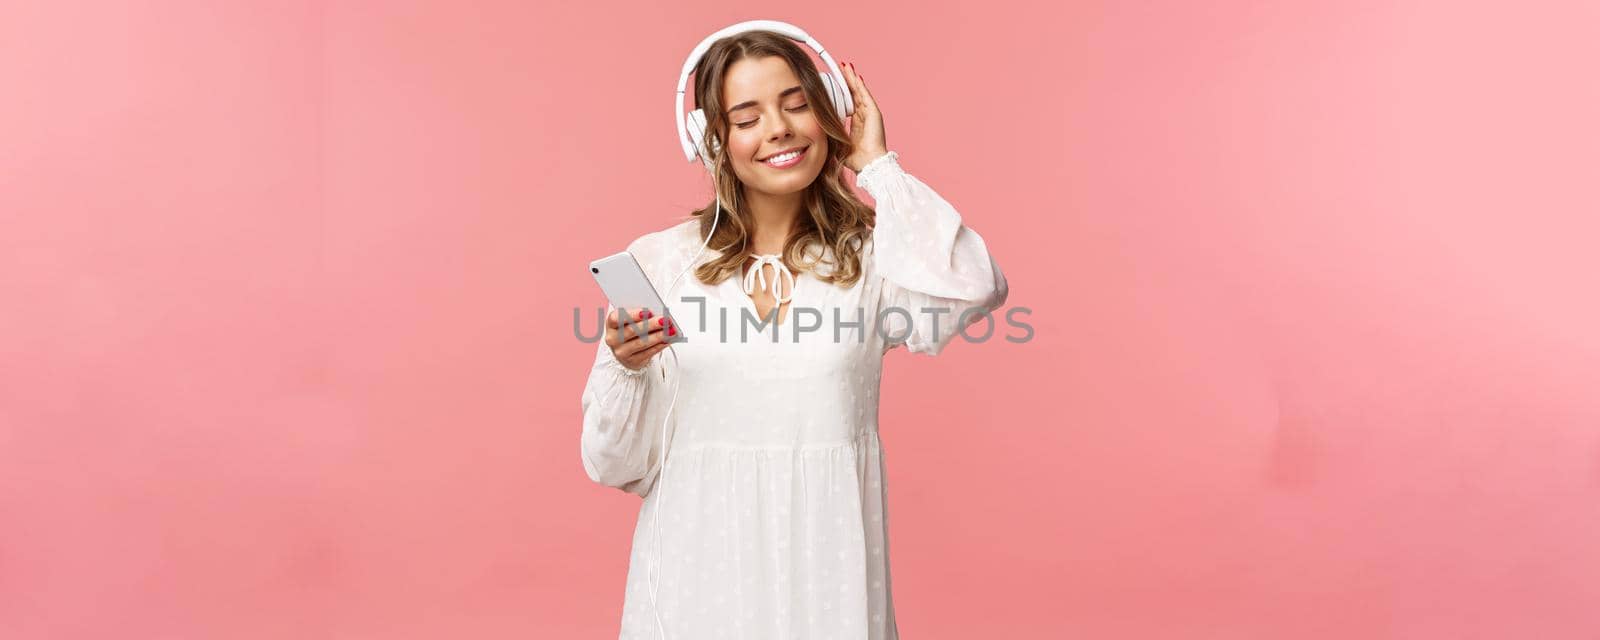 Portrait of tender happy and cute blond girl in white dress, close eyes and smiling pleased as listening music in headphones, feeling warmth and happiness enjoying favorite track, hold mobile phone.